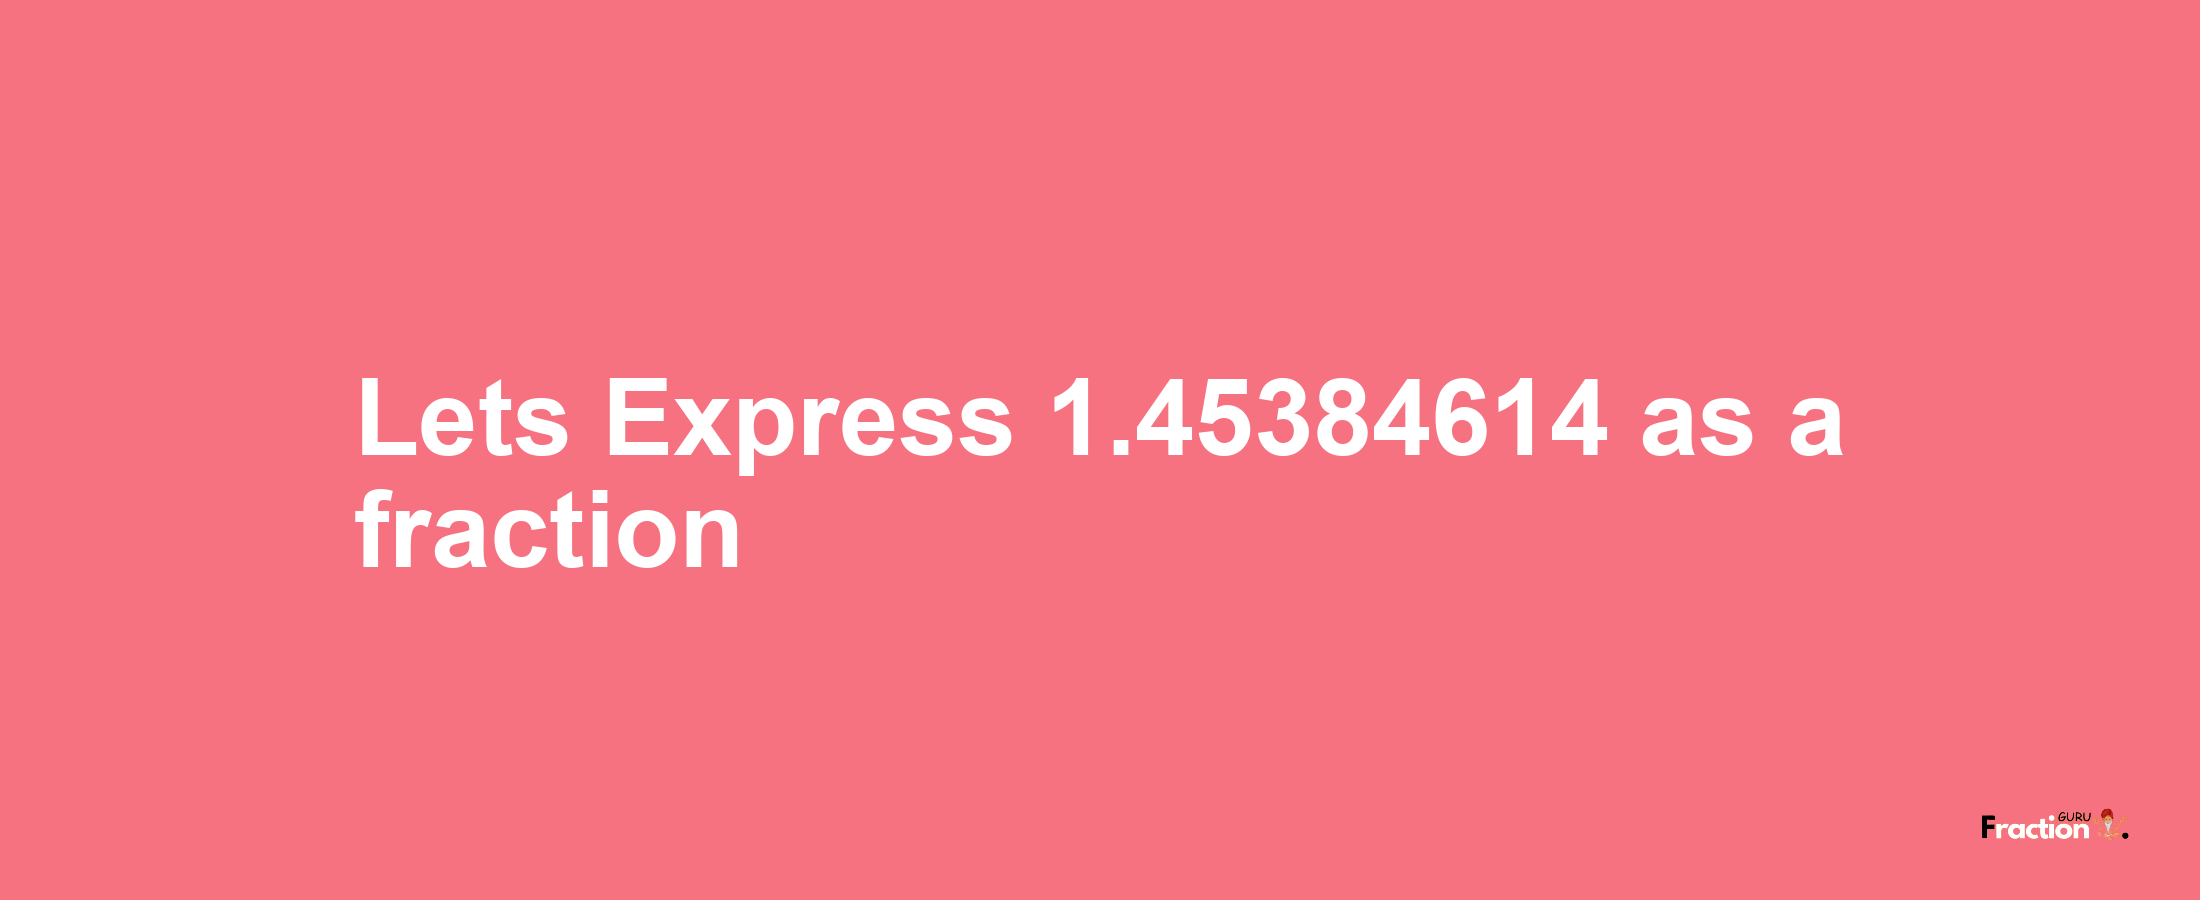 Lets Express 1.45384614 as afraction